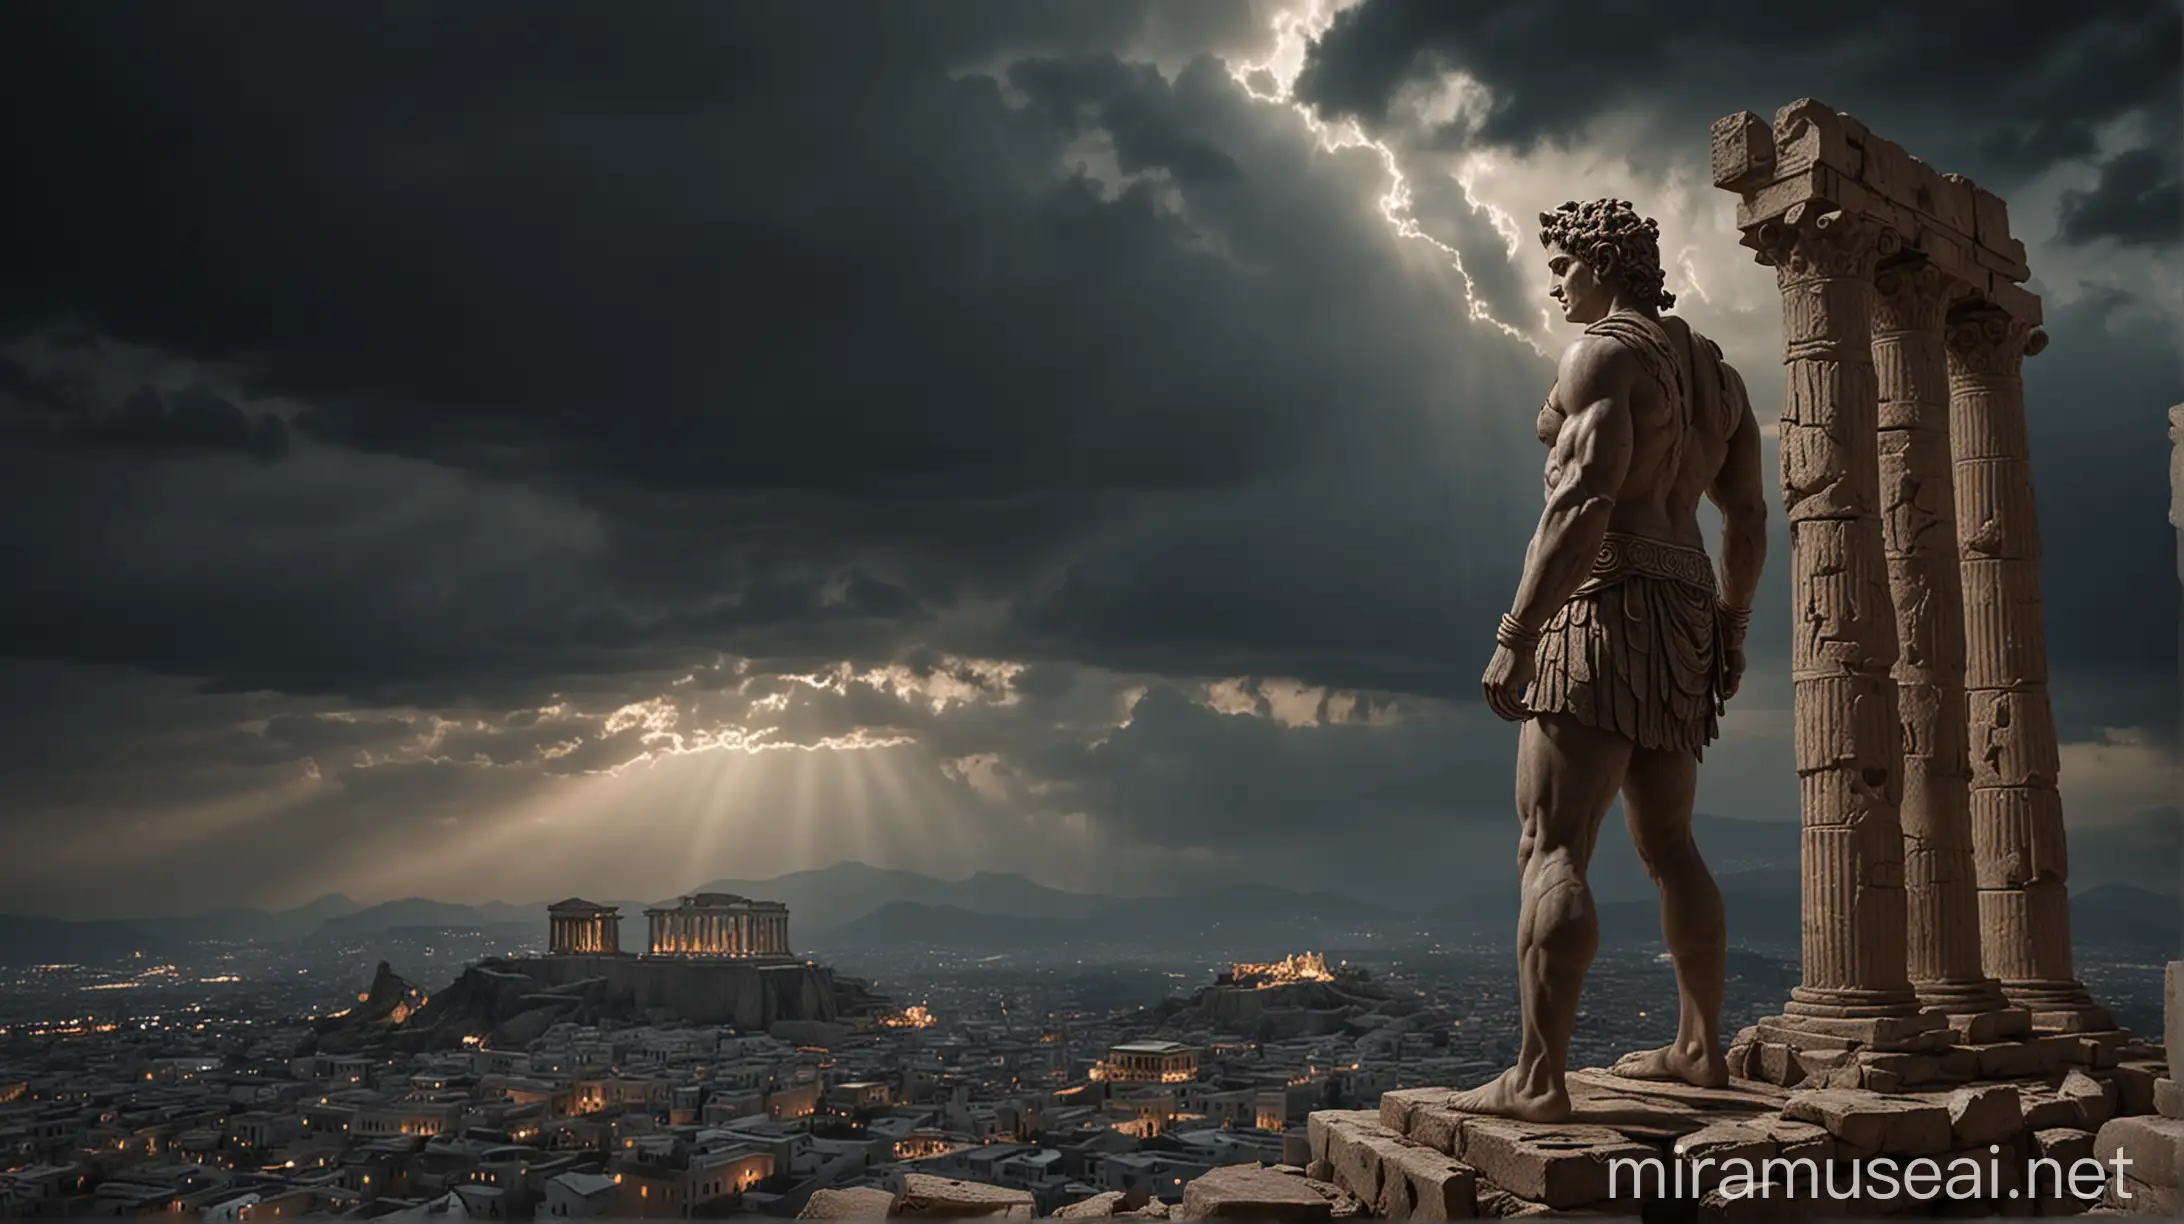 A dramatic and cinematic scene of an ancient Greek statue of a muscular warrior or god standing majestically on a ruined temple overlooking a city skyline at night, with stormy clouds parting to reveal dramatic lighting and rays of light illuminating the statue and temple ruins against the city backdrop, highly detailed, photorealistic, cinematic lighting and atmosphere, detailed stone texture, dramatic sky.